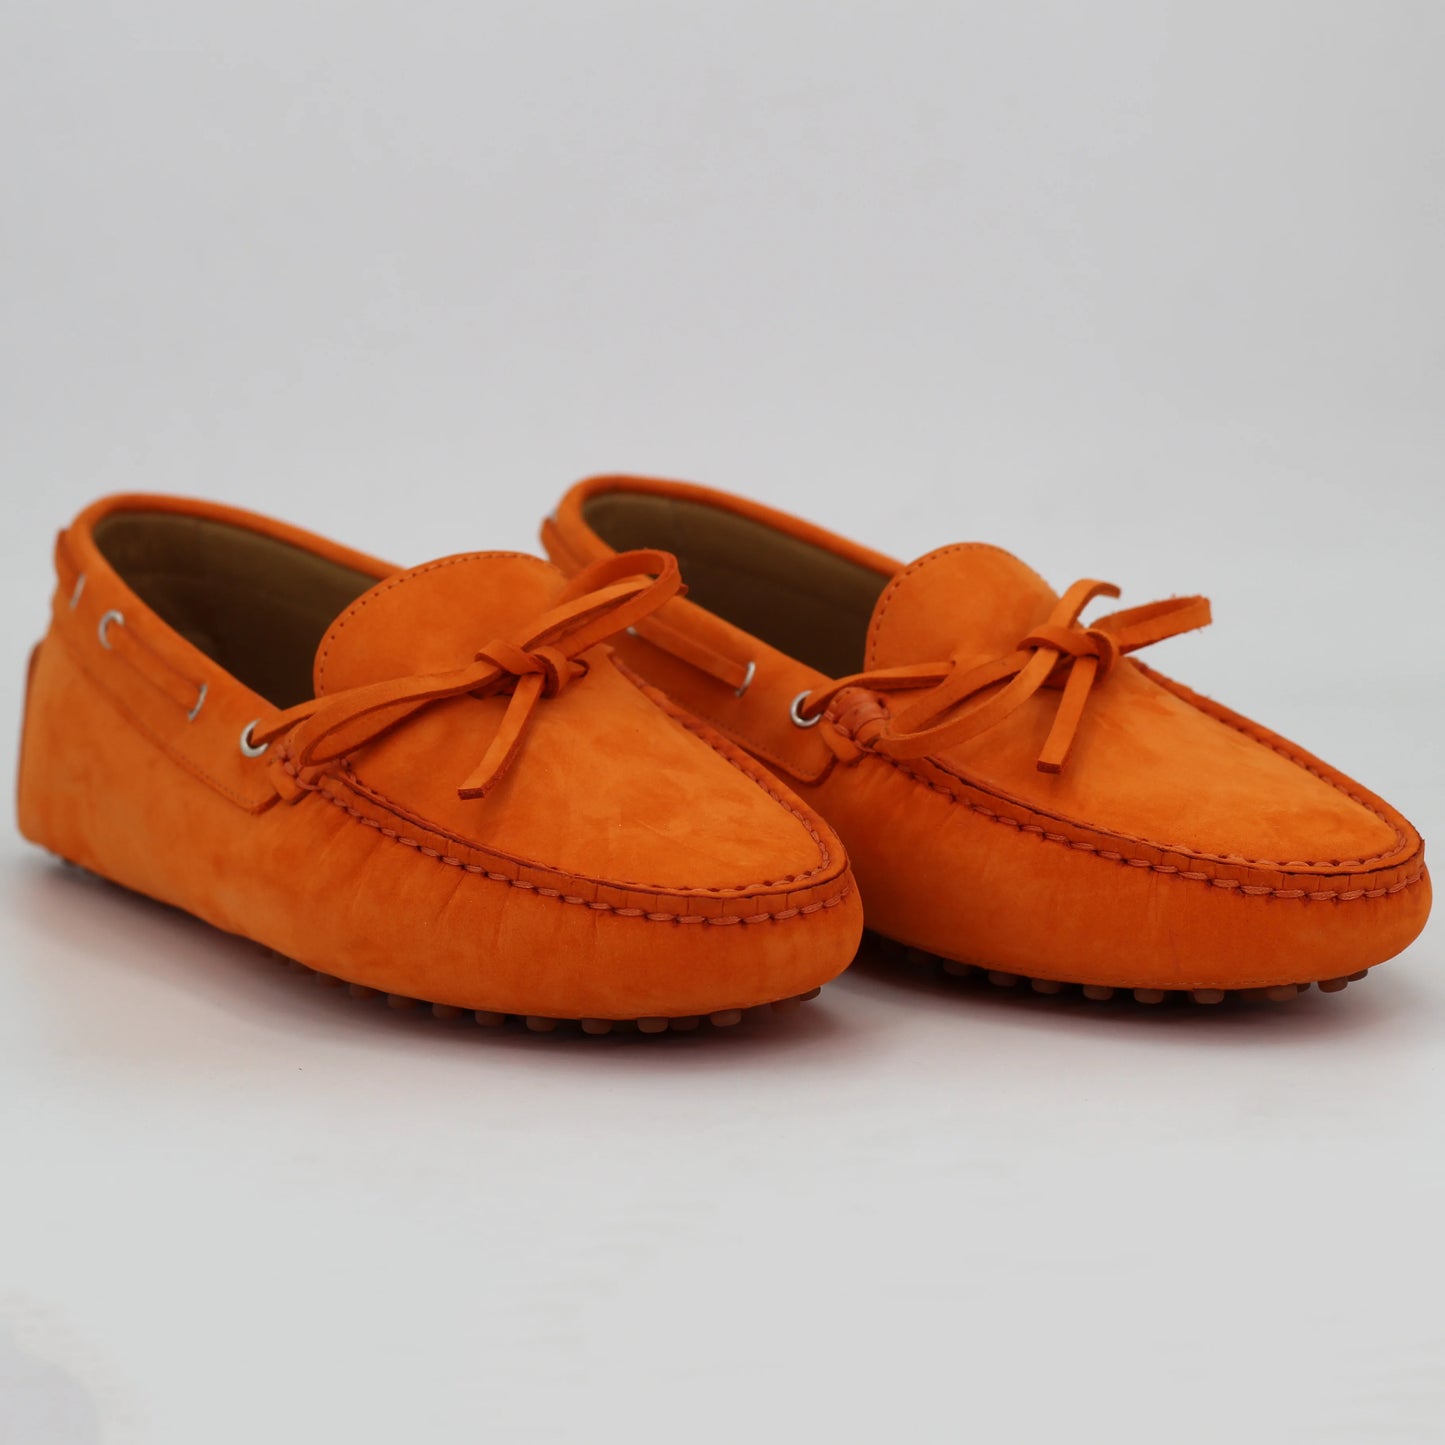 Shop Handmade Italian Leather moccasin in orange (COND04011) or browse our range of hand-made Italian shoes in leather or suede in-store at Aliverti Cape Town, or shop online. We deliver in South Africa & offer multiple payment plans as well as accept multiple safe & secure payment methods.